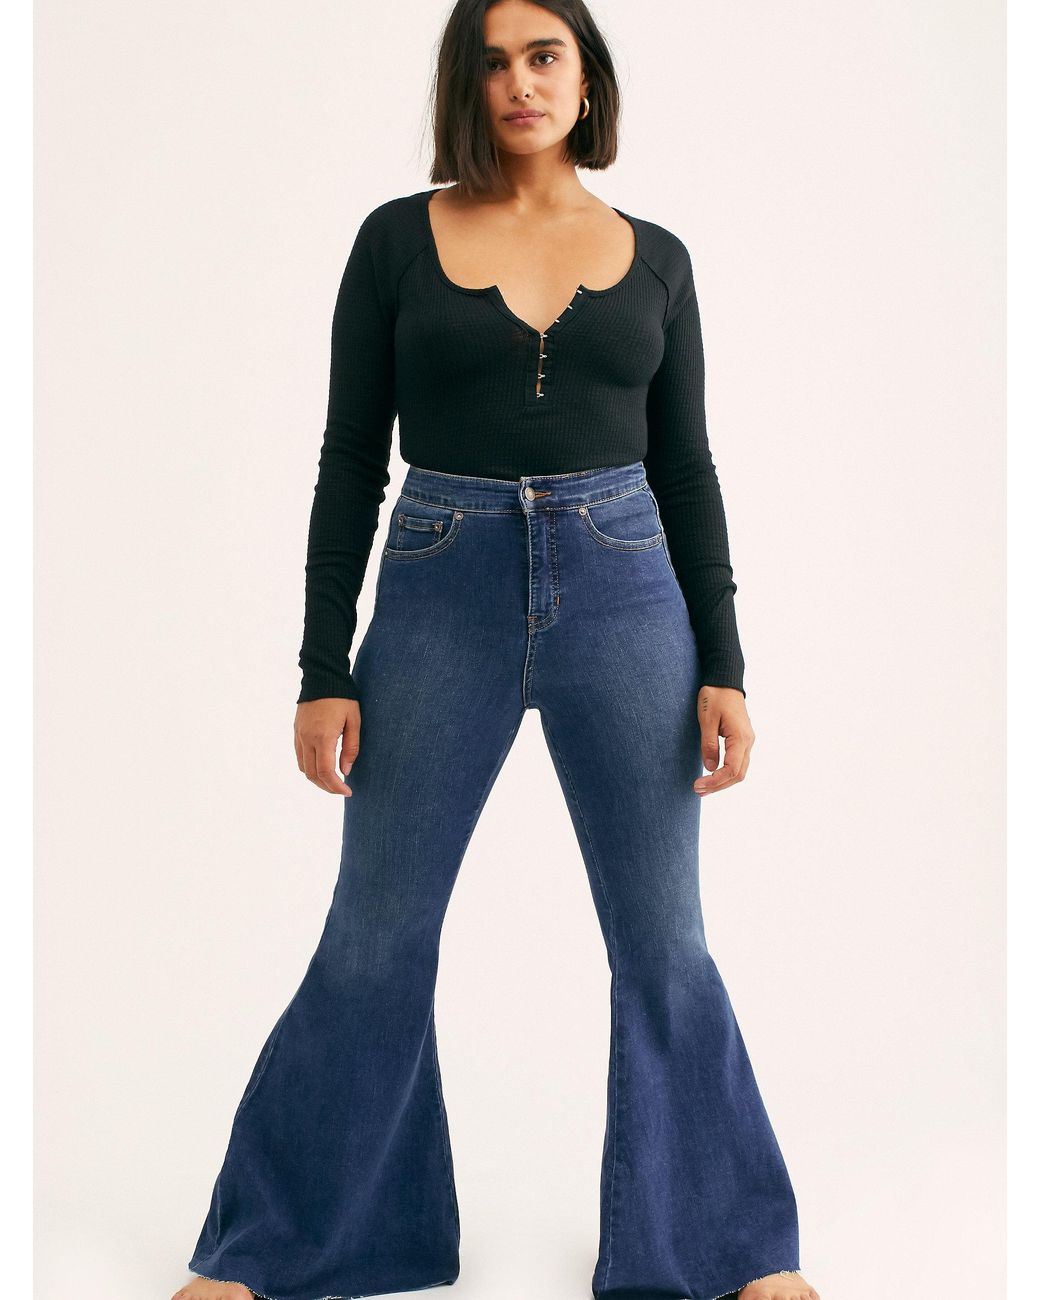 Free People Crvy Super High-rise Lace-up Flare Jeans in Blue | Lyst